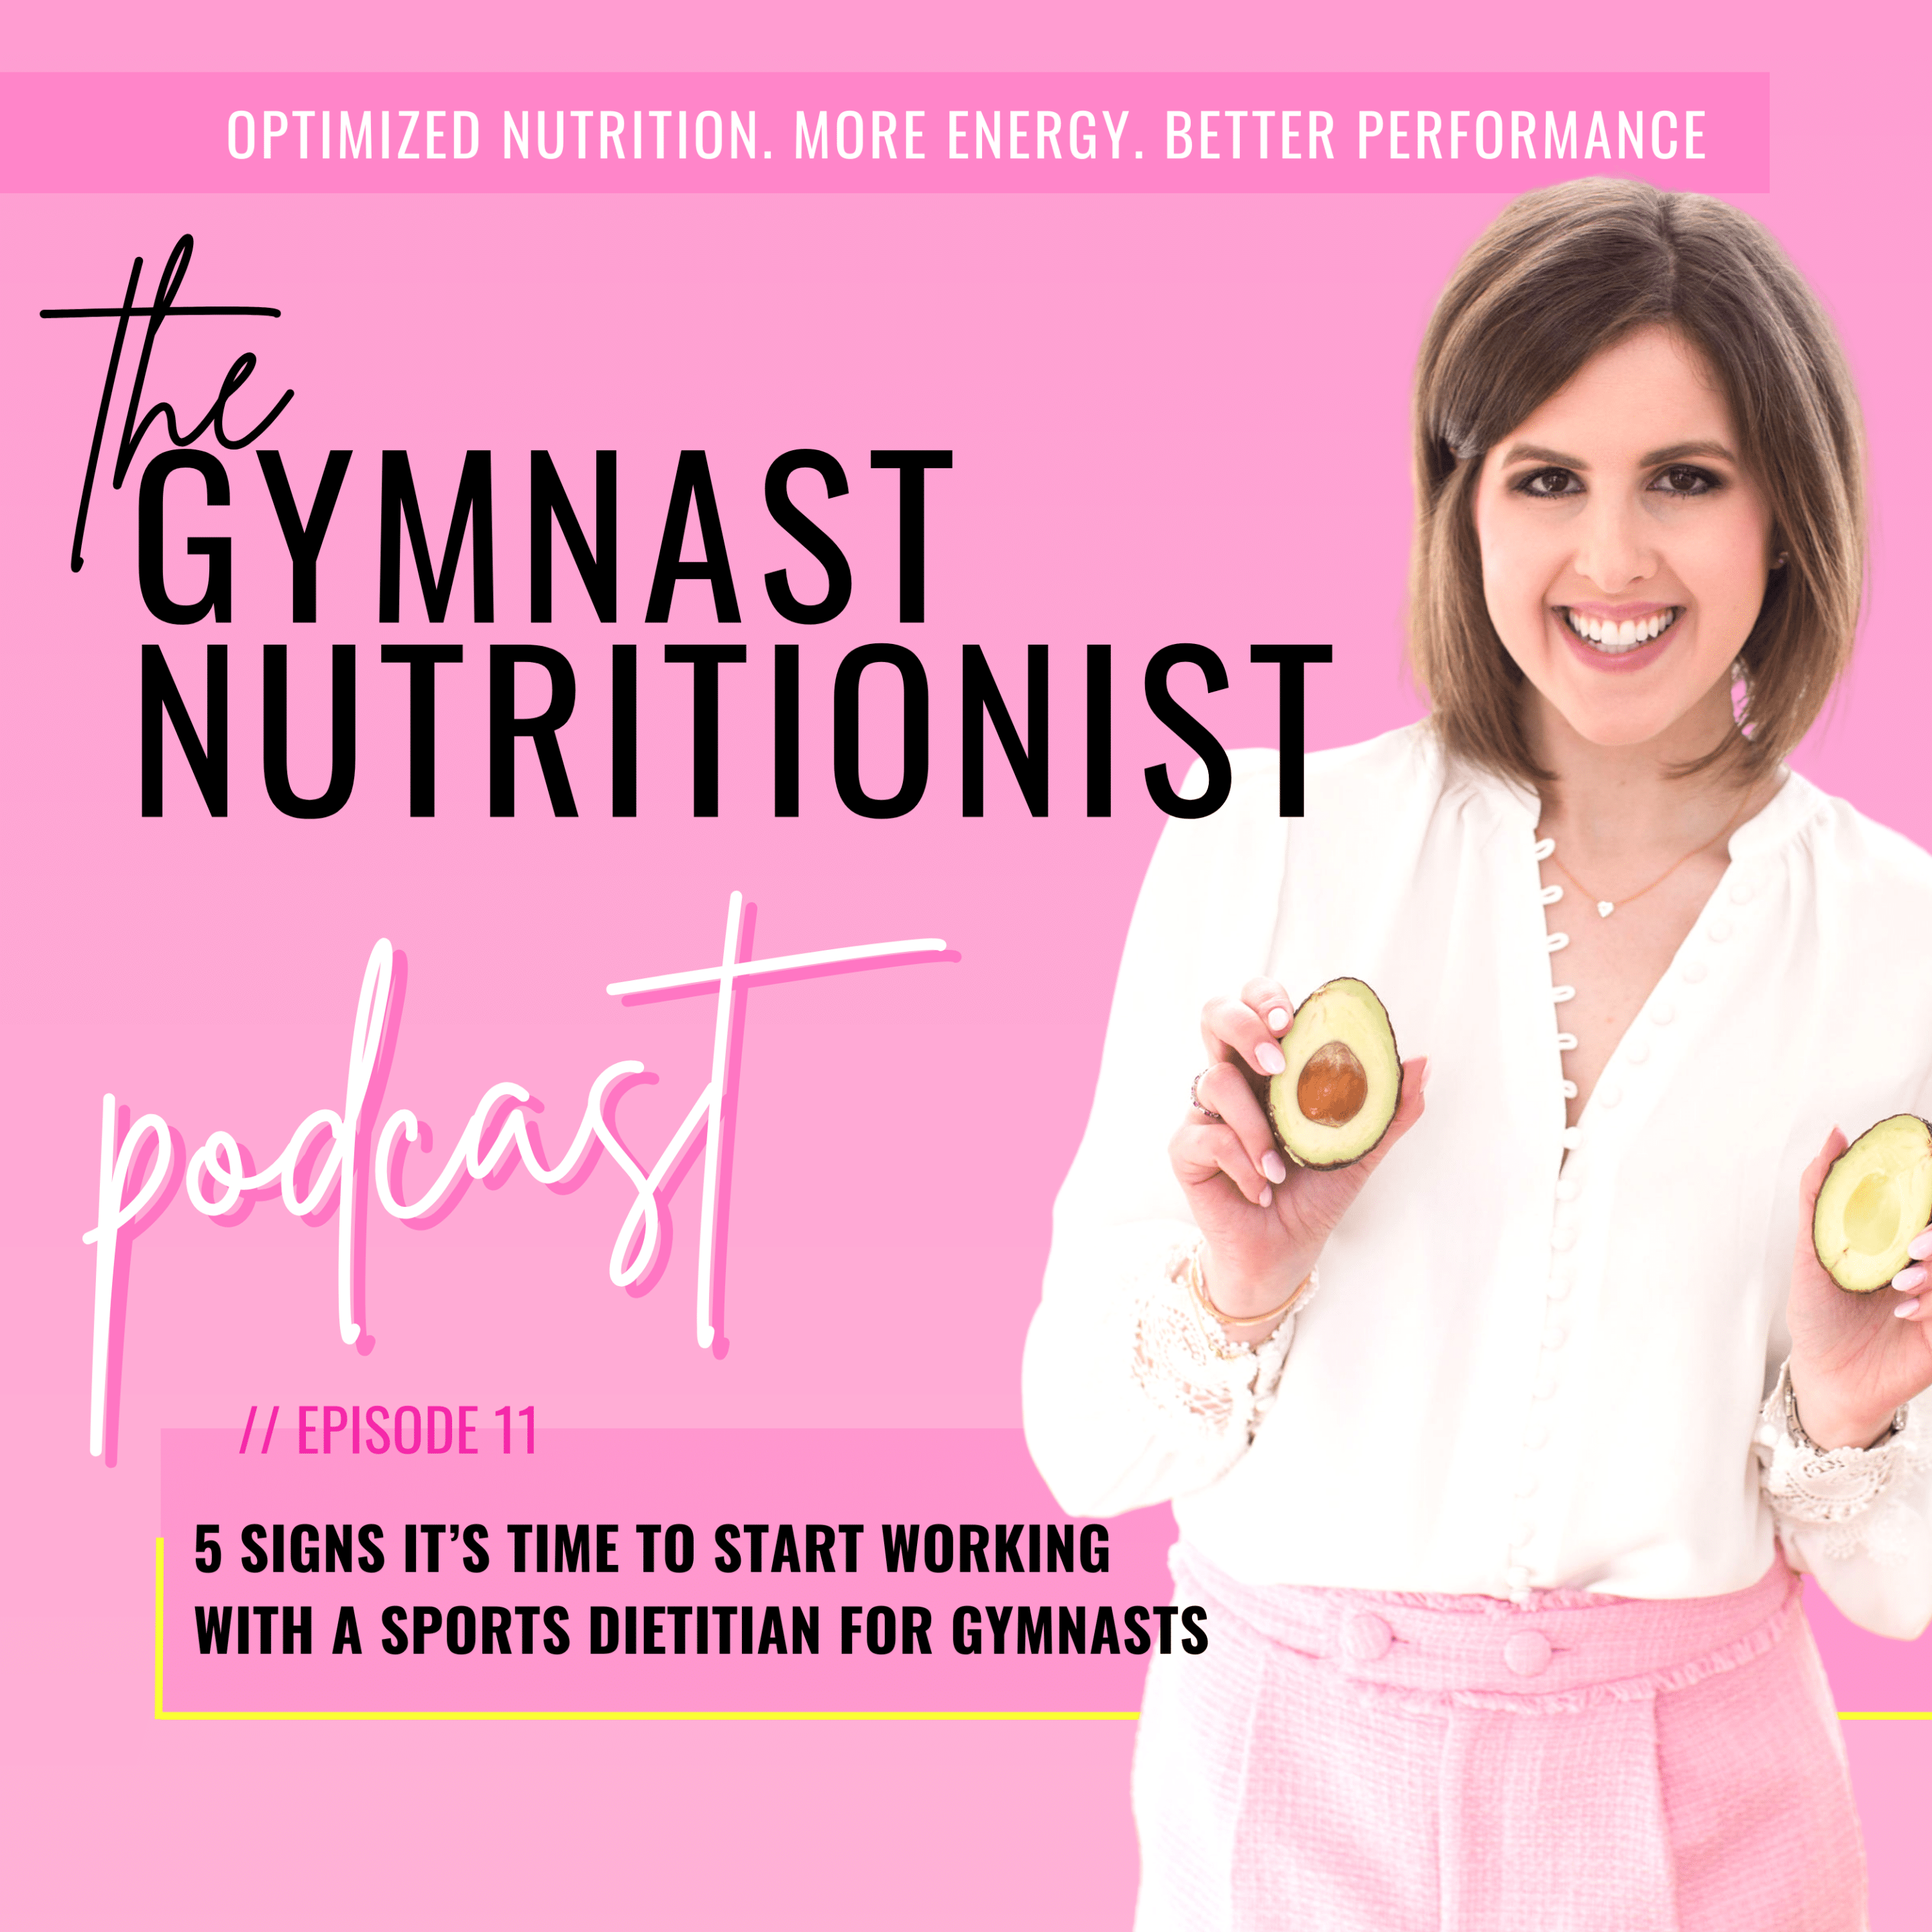 Episode 11: 5 Signs It's Time to Start Working with a Sports Dietitian